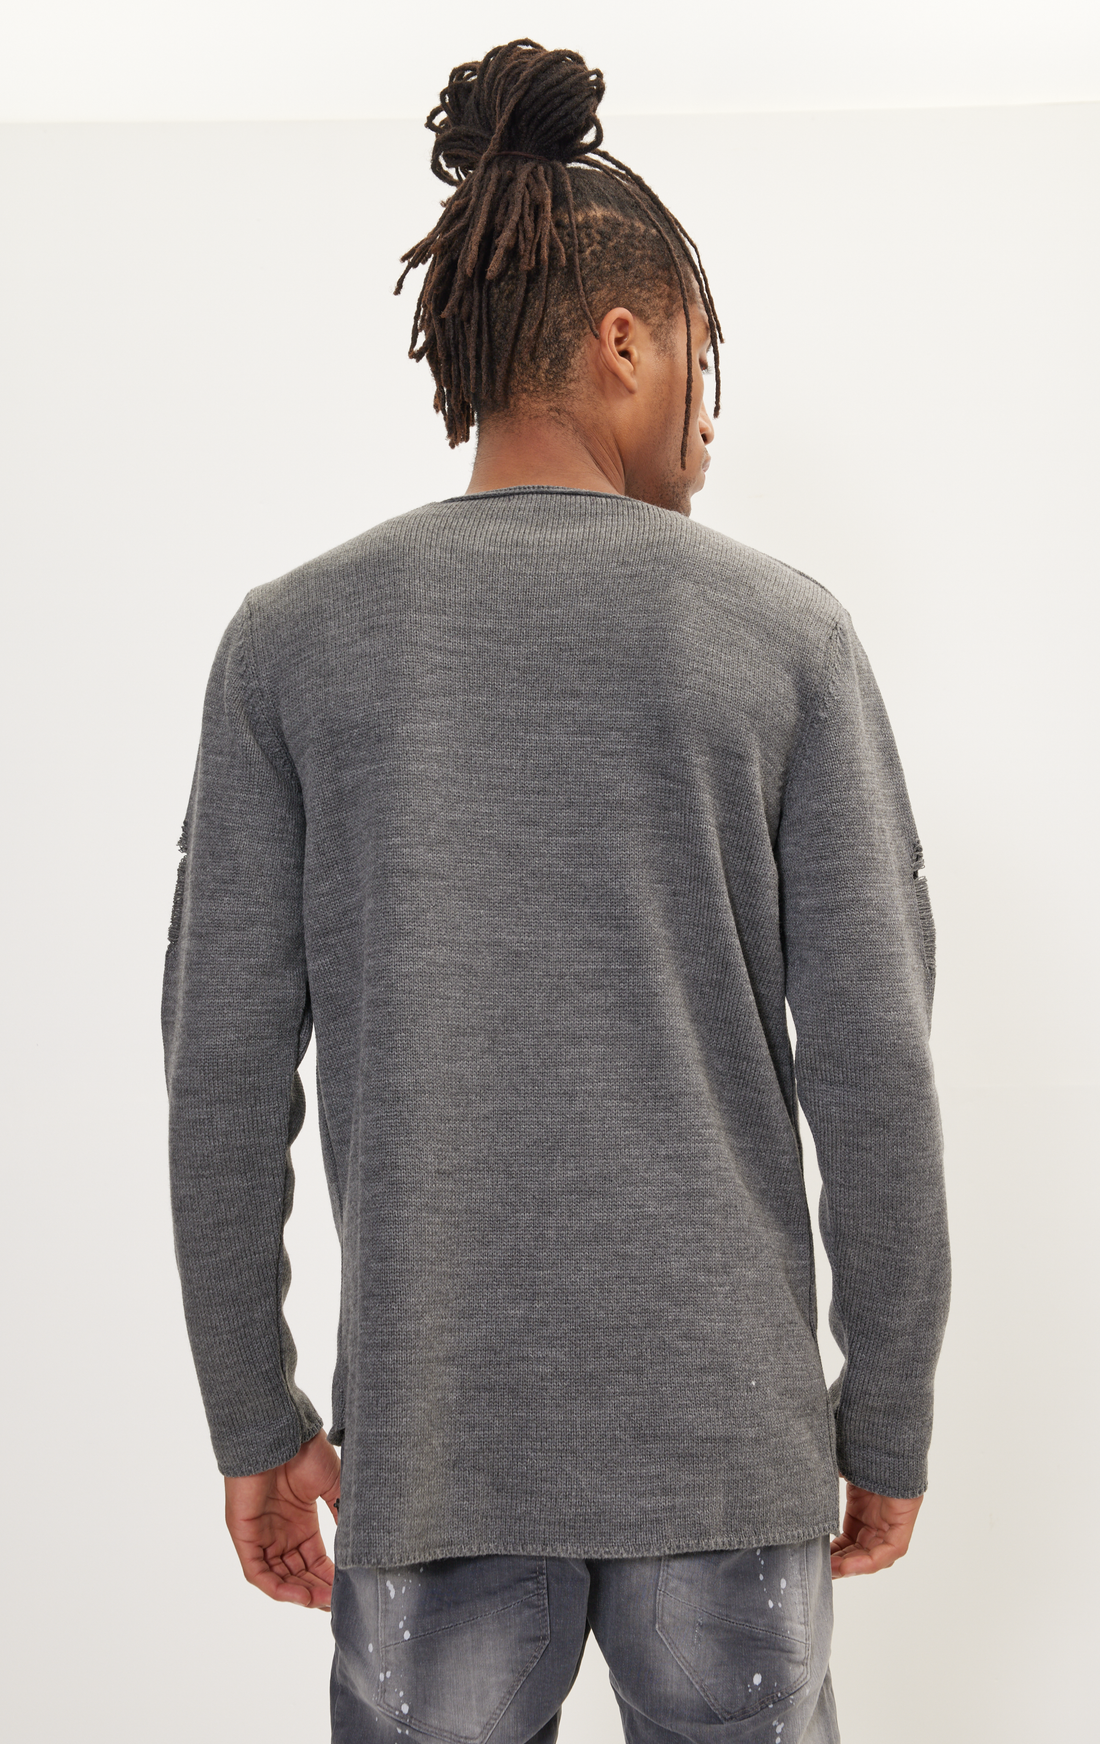 Distorted Anthracite Sweater